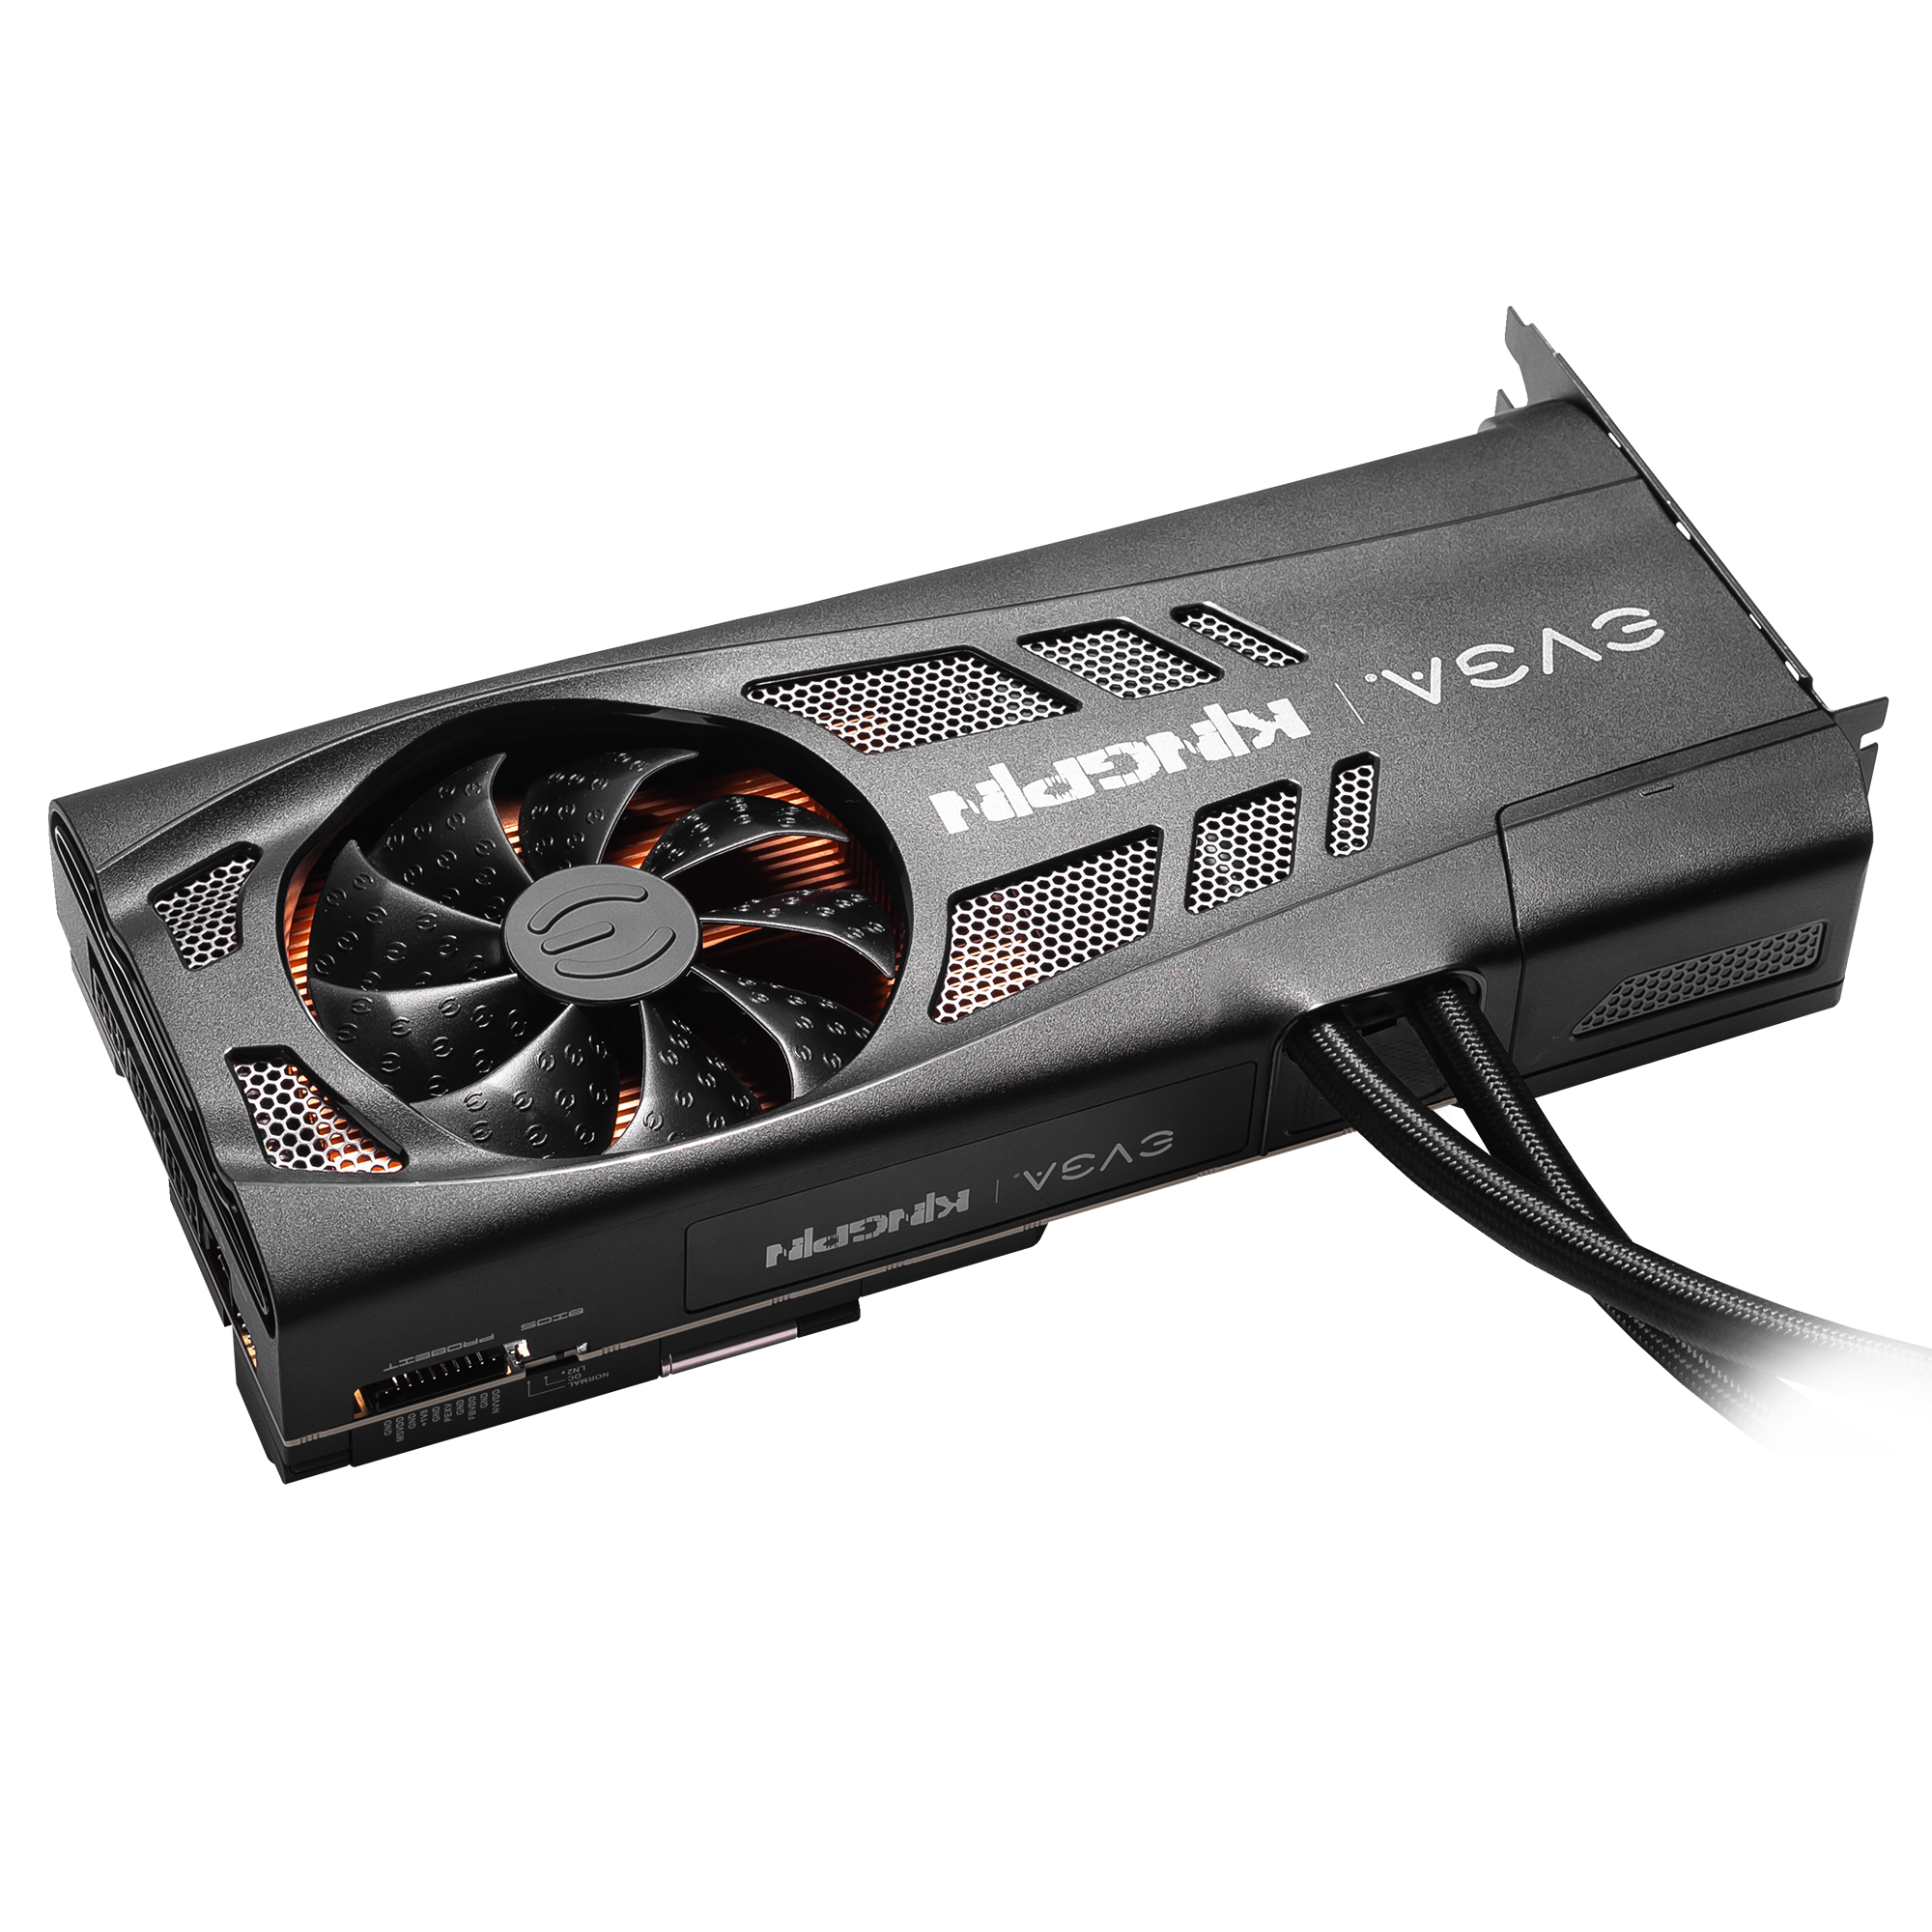 Media asset in full size related to 3dfxzone.it news item entitled as follows: EVGA annuncia la GeForce RTX 3090 K|NGP|N HYBRID GAMING da $2000 | Image Name: news31353_EVGA-GeForce-RTX-3090-KINGPIN-HYBRID-GAMING_2.png